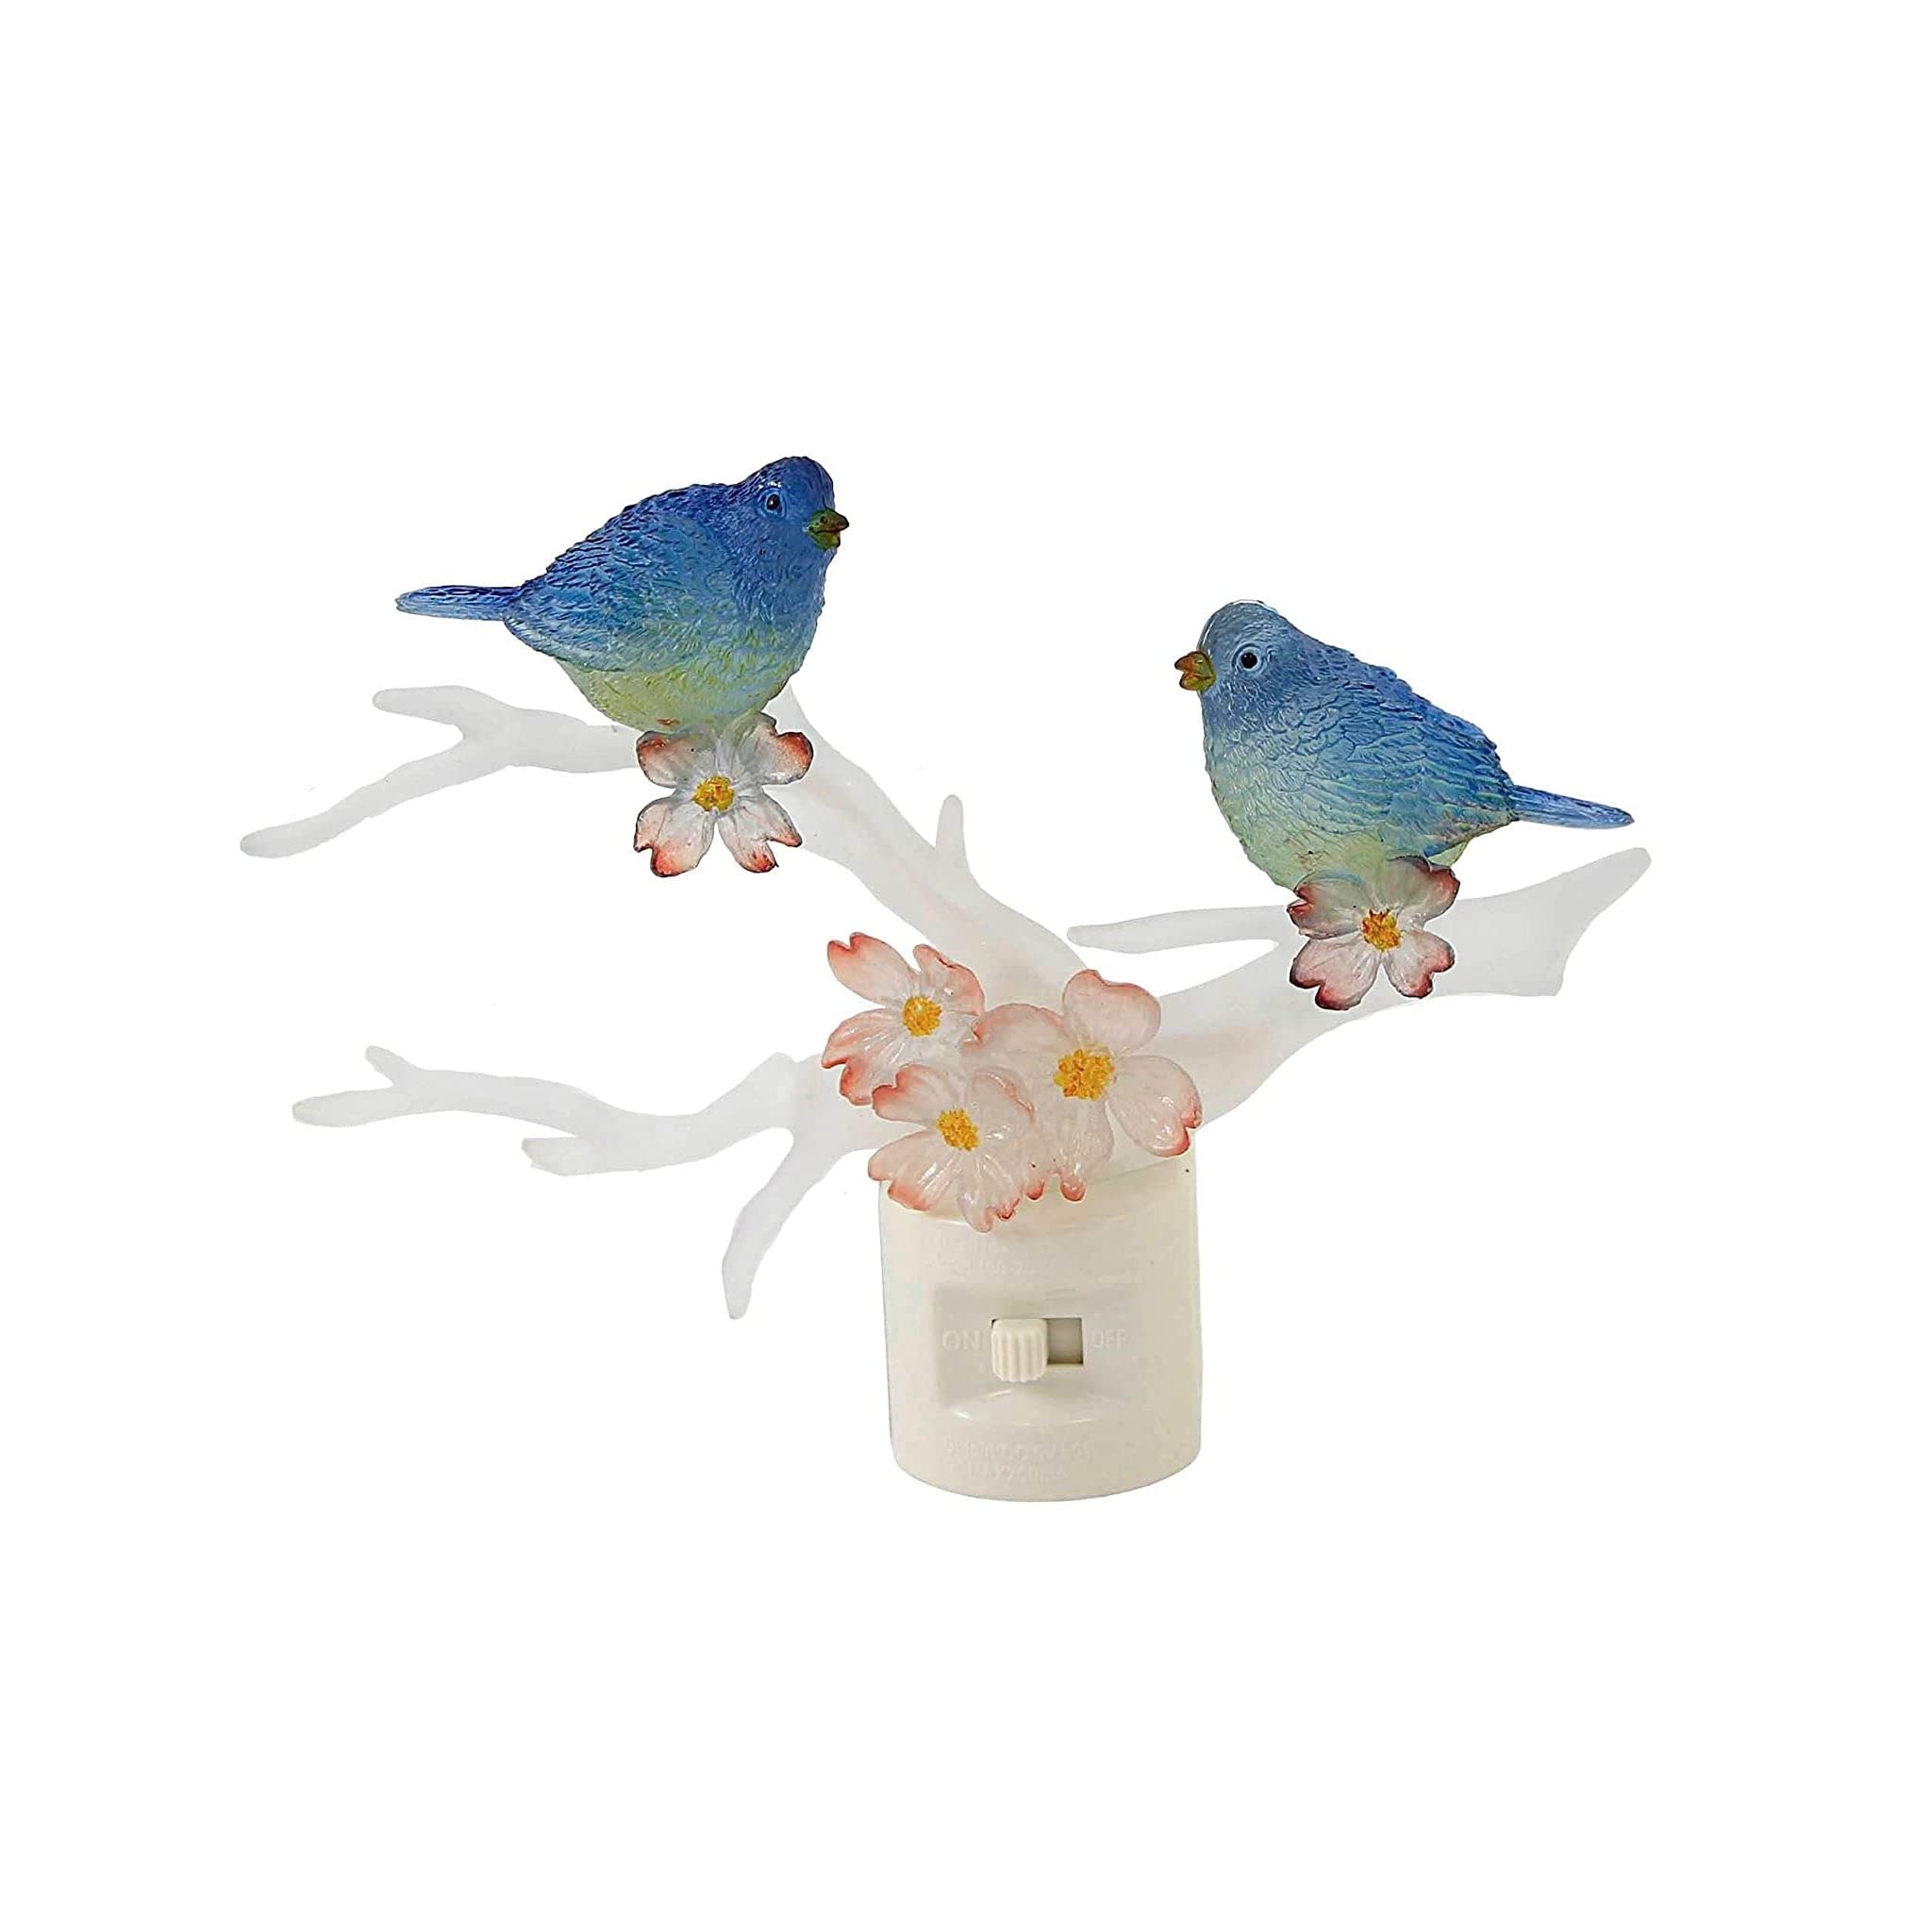 Roman � Bluebird, Night Light, 5" H, Plastic, Wall Decoration, Home Decor, Adorable Gift, Durable, Beautifully Detailed  - Like New